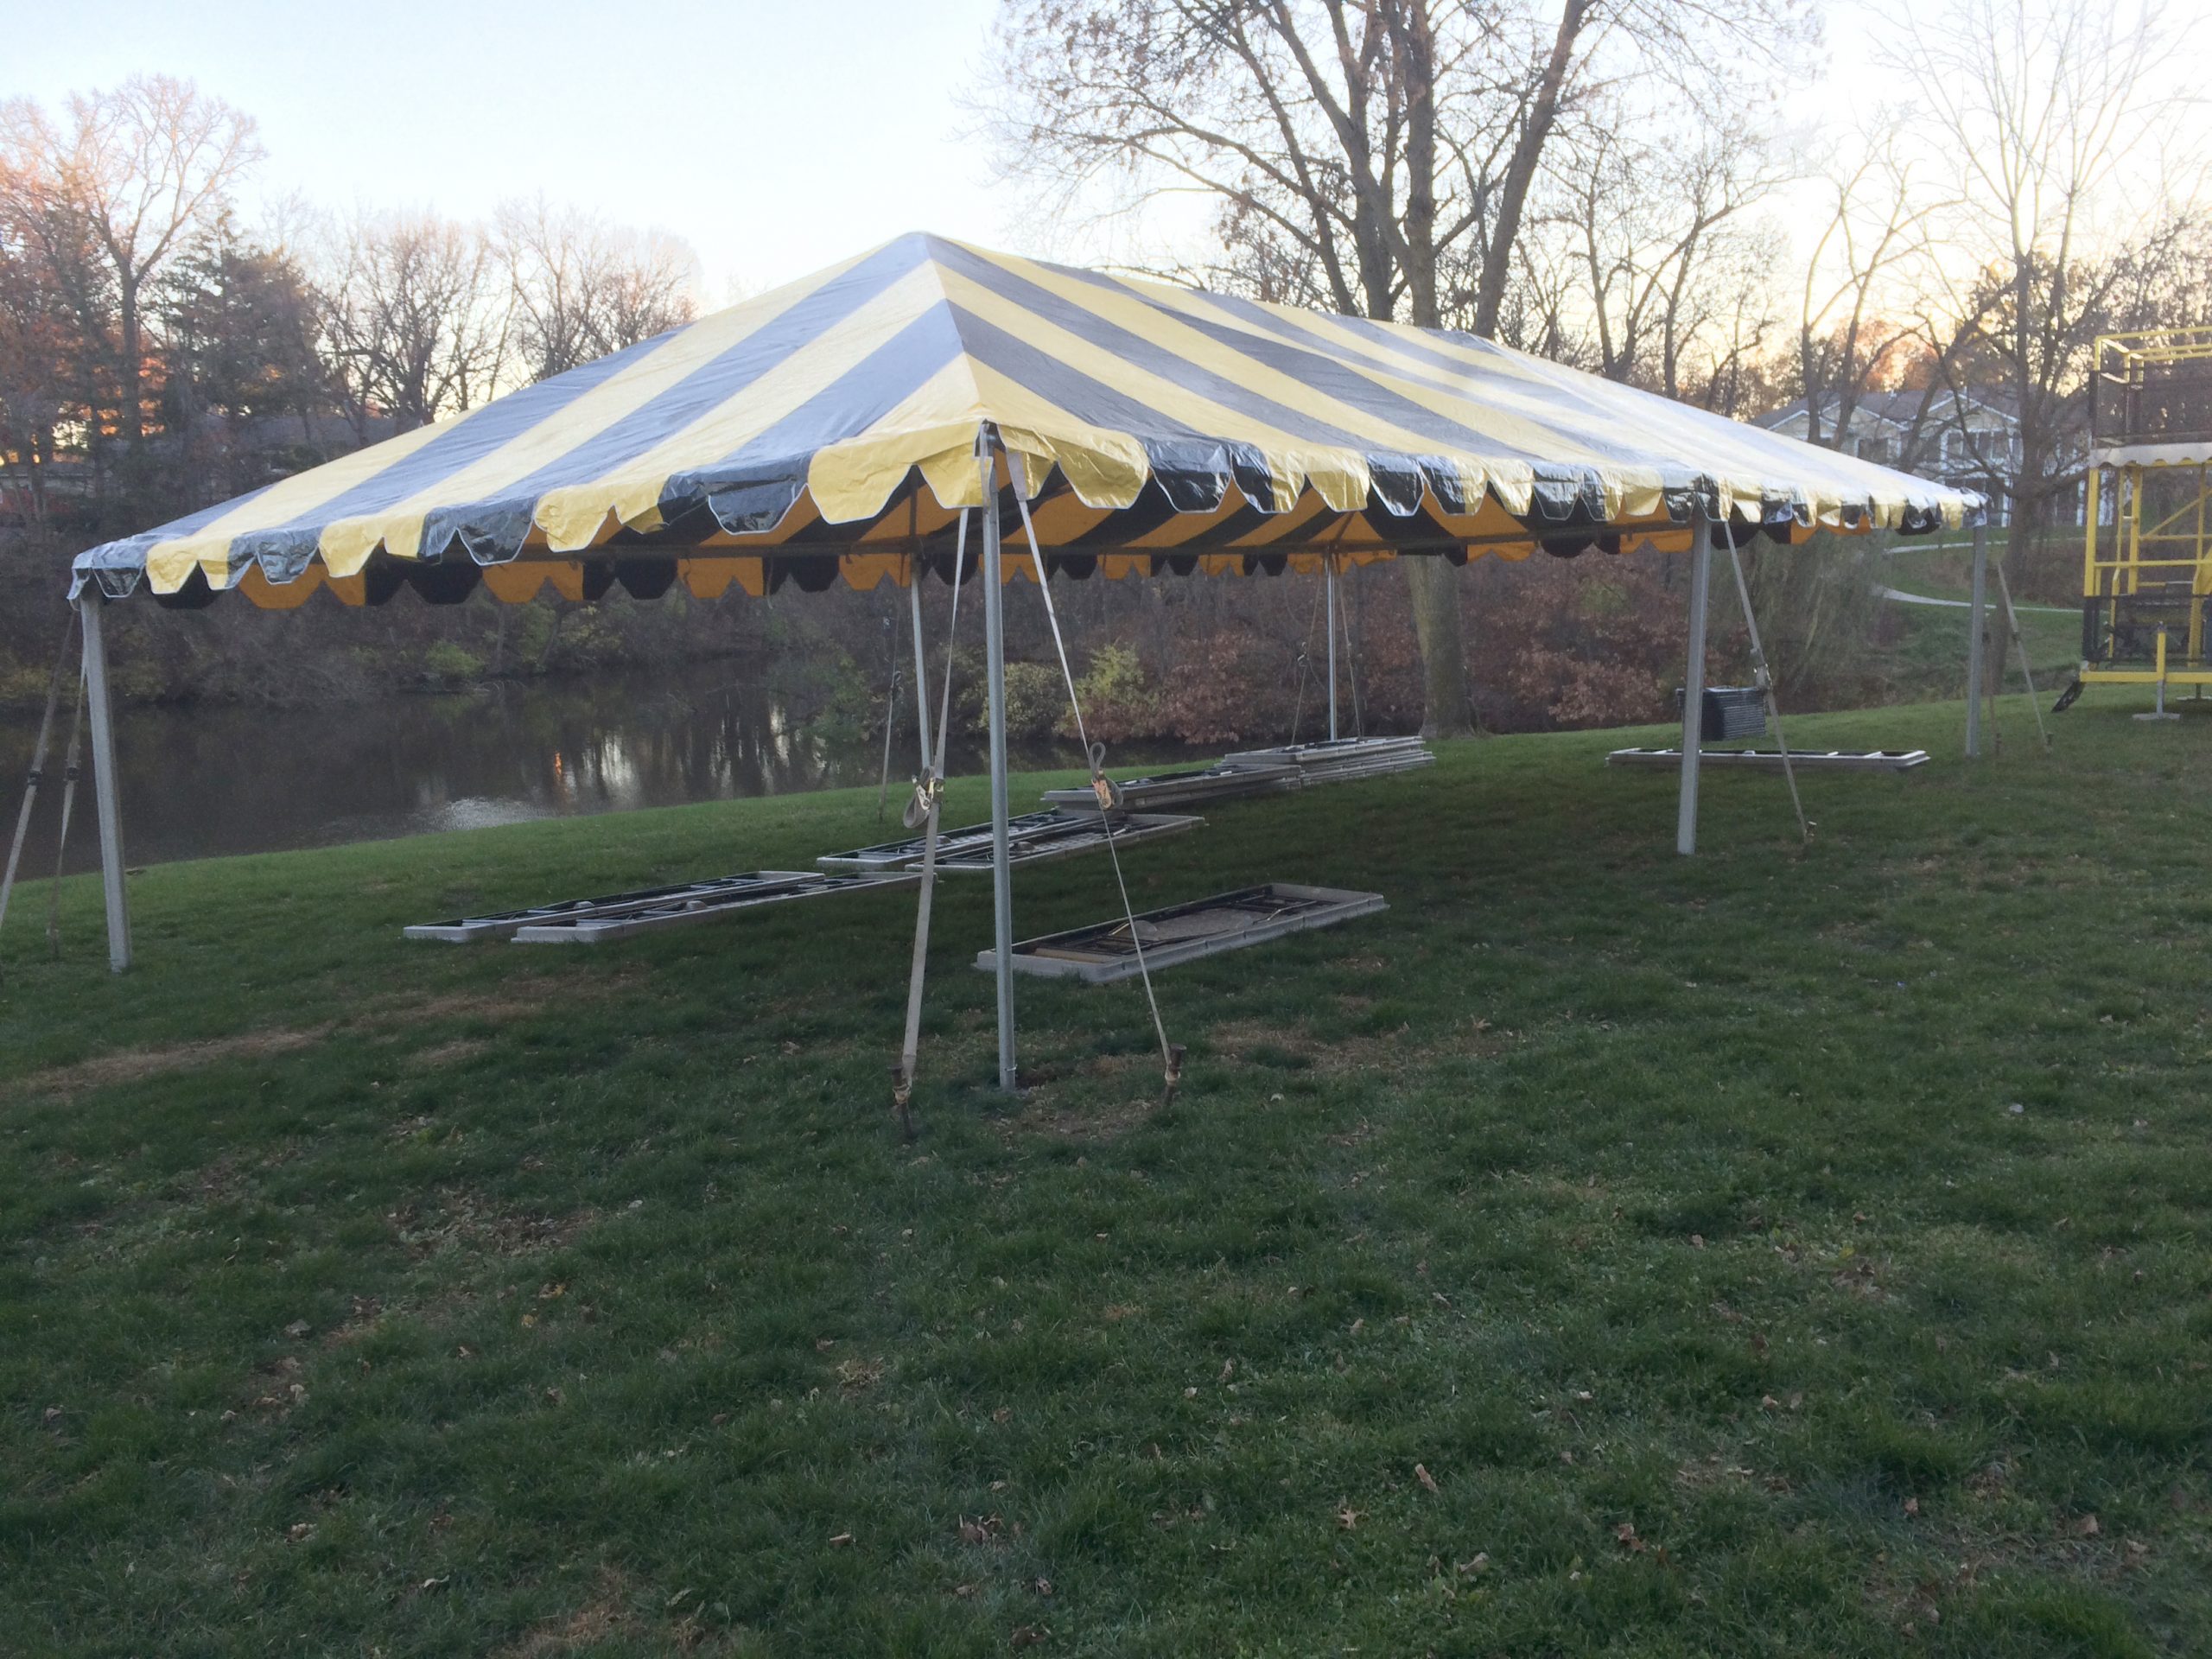 20′ x 40′ frame tent for a Tailgating event in Iowa